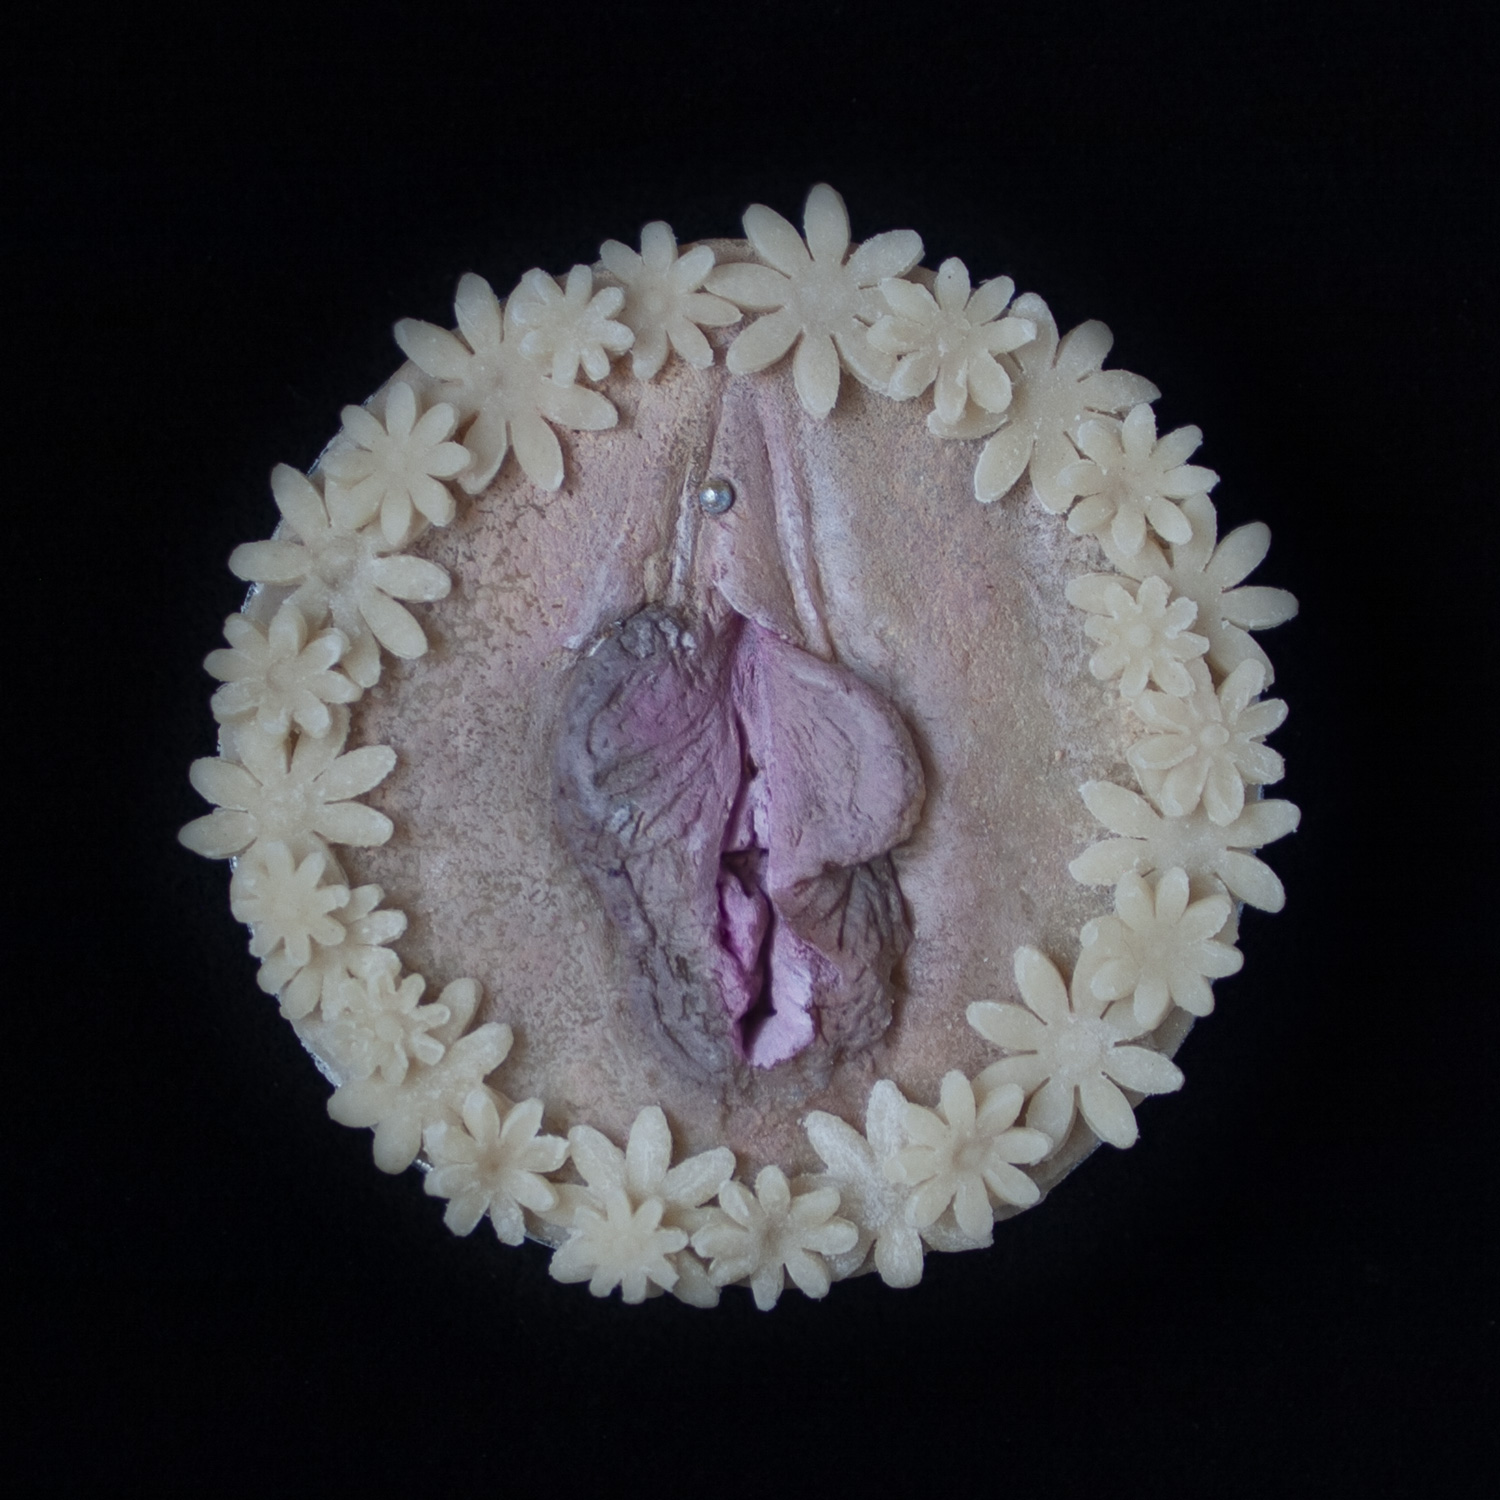 Unbaked hand painted pie on a black background. In the center of the pie is a hand sculpted pie vulva surrounded by pie crust daisies. The Clitoral hood is pierced